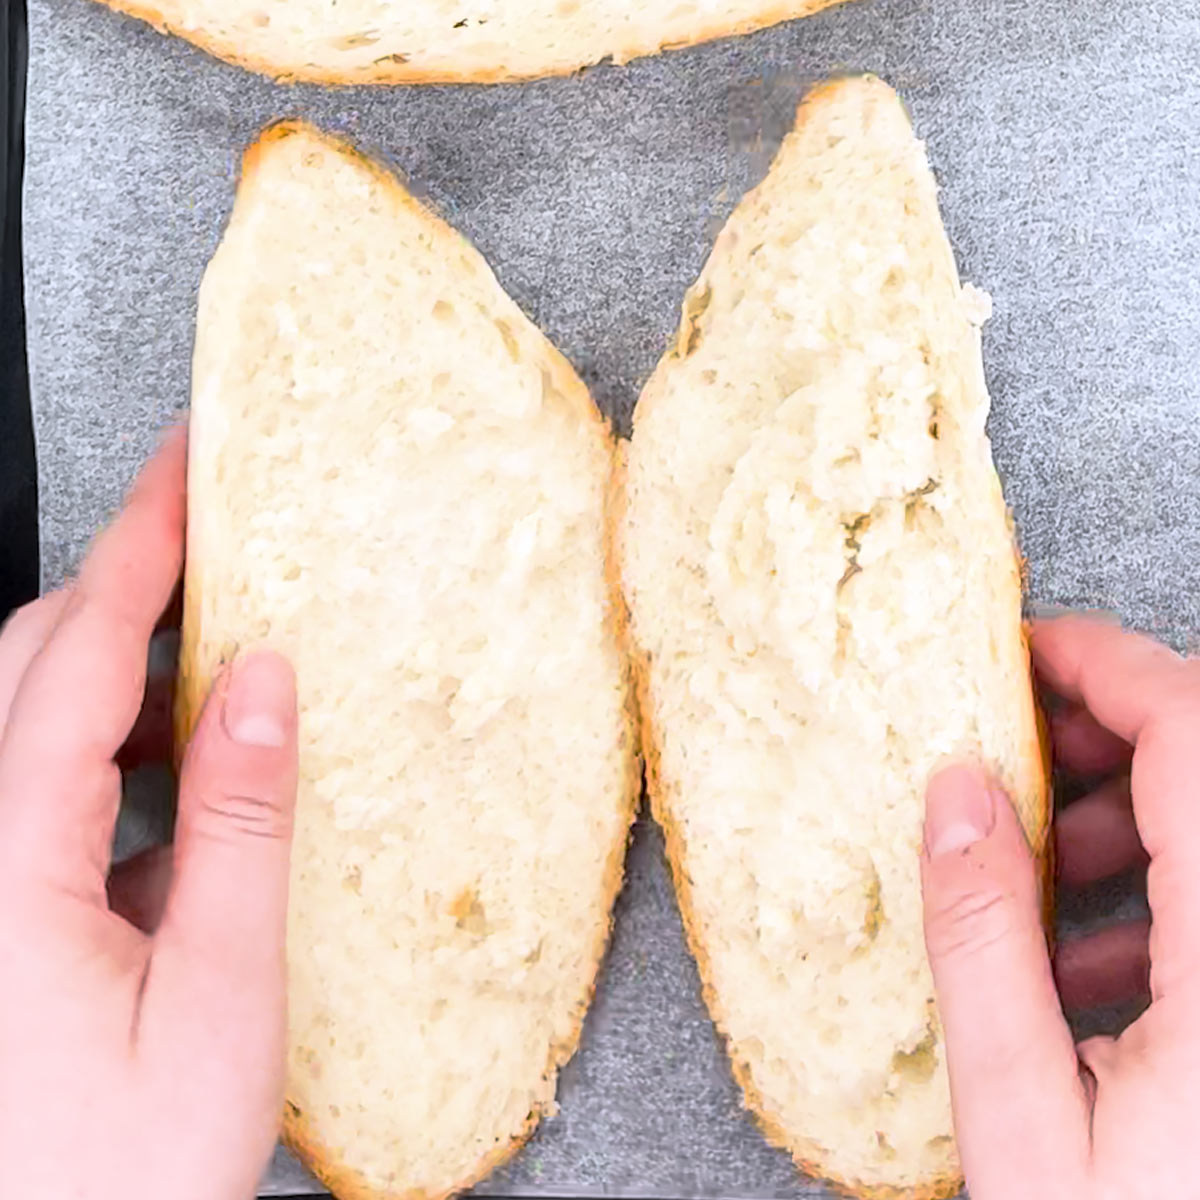 place french bread face up on a baking sheet